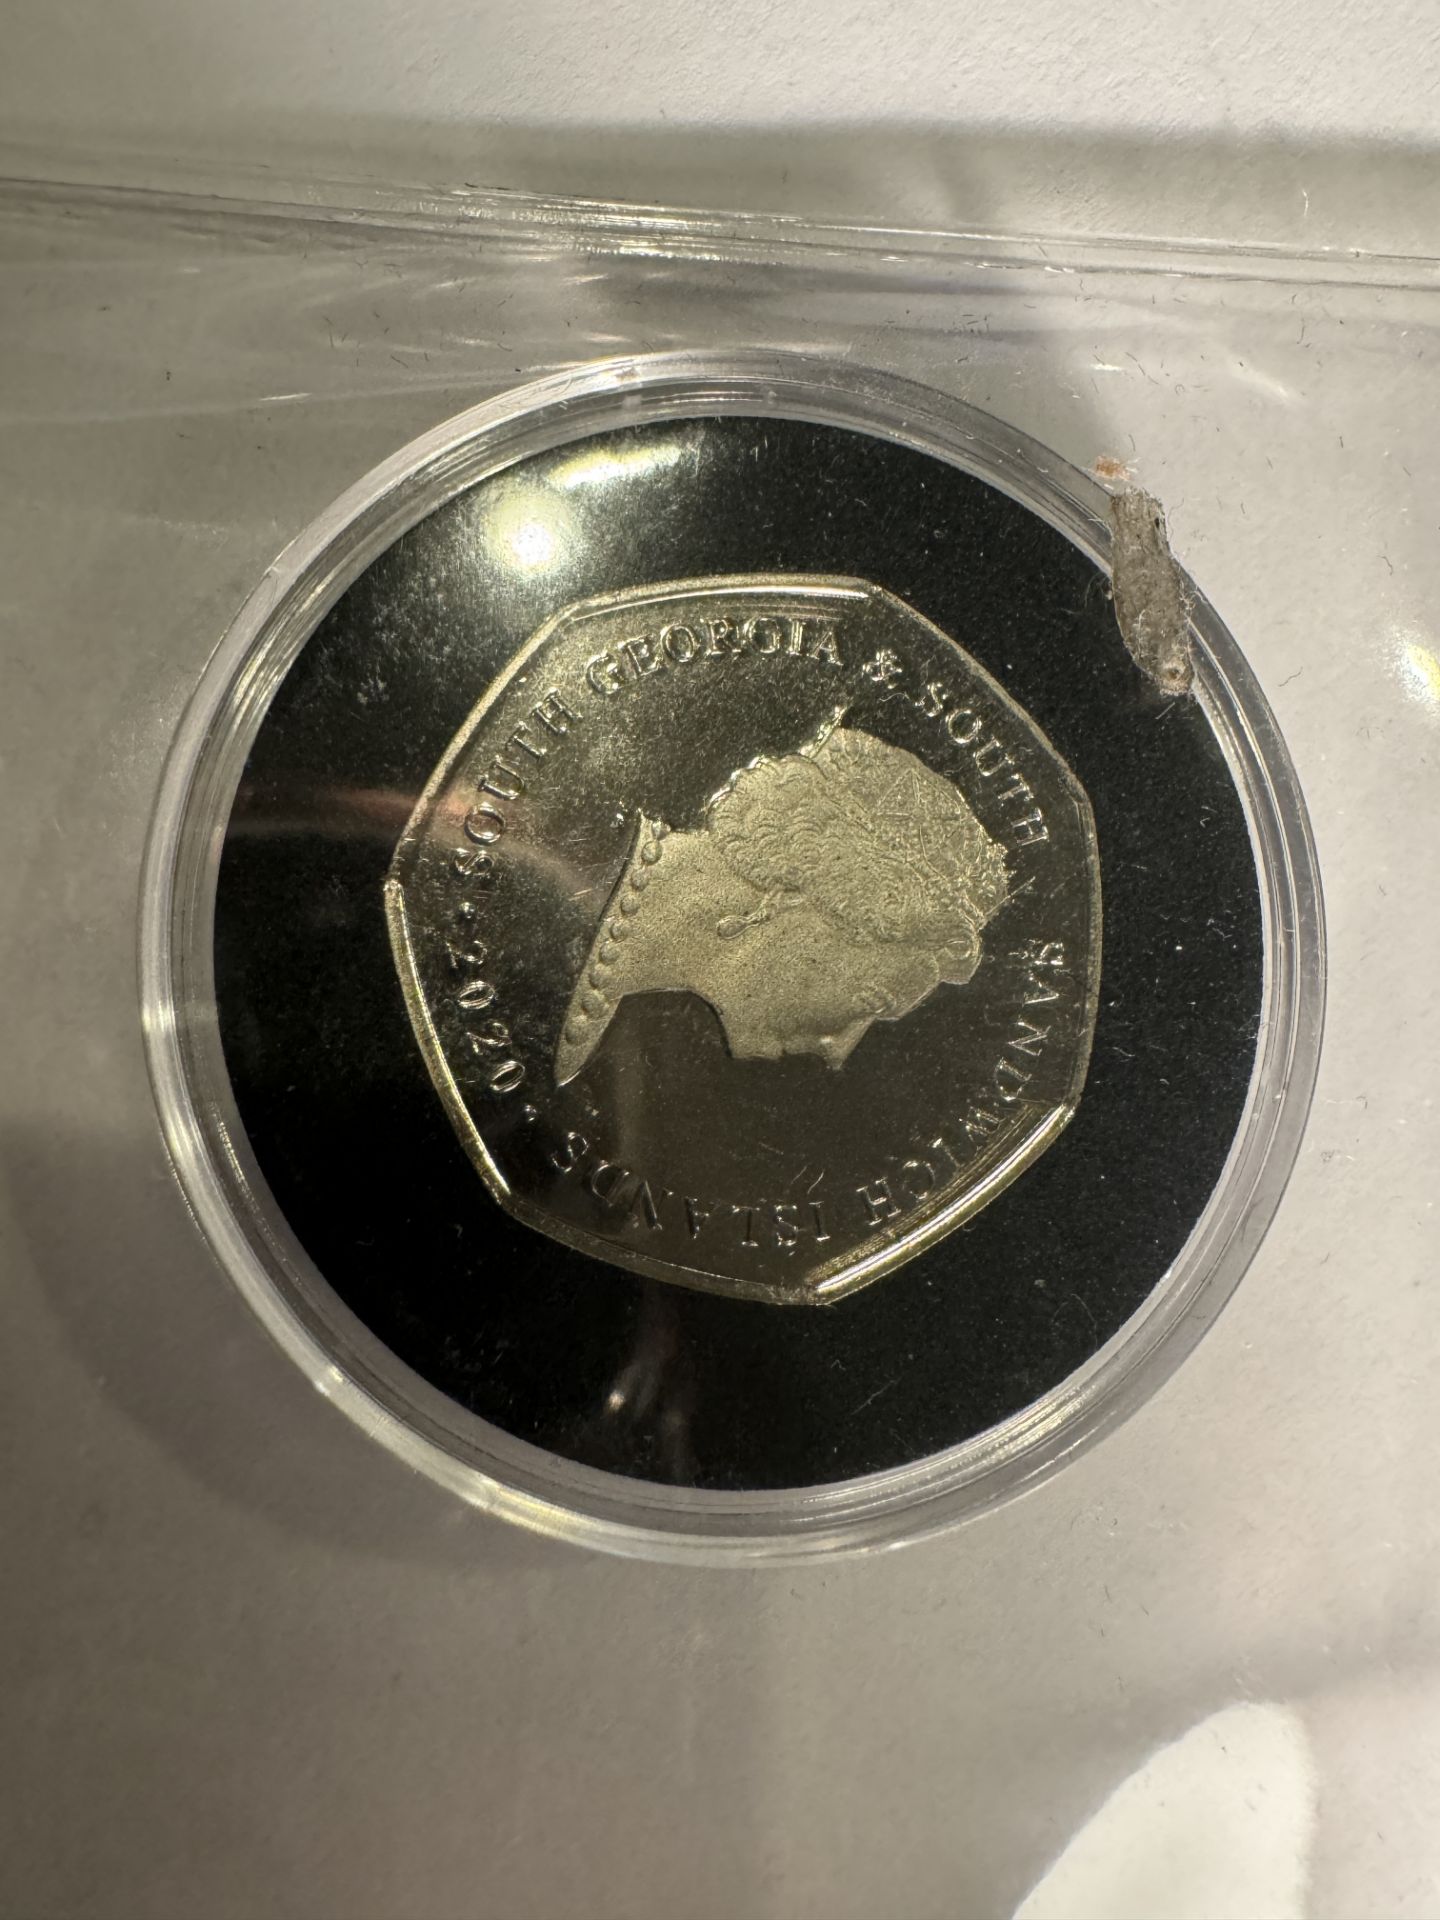 2020 PENGUIN 50P COIN - Image 3 of 3